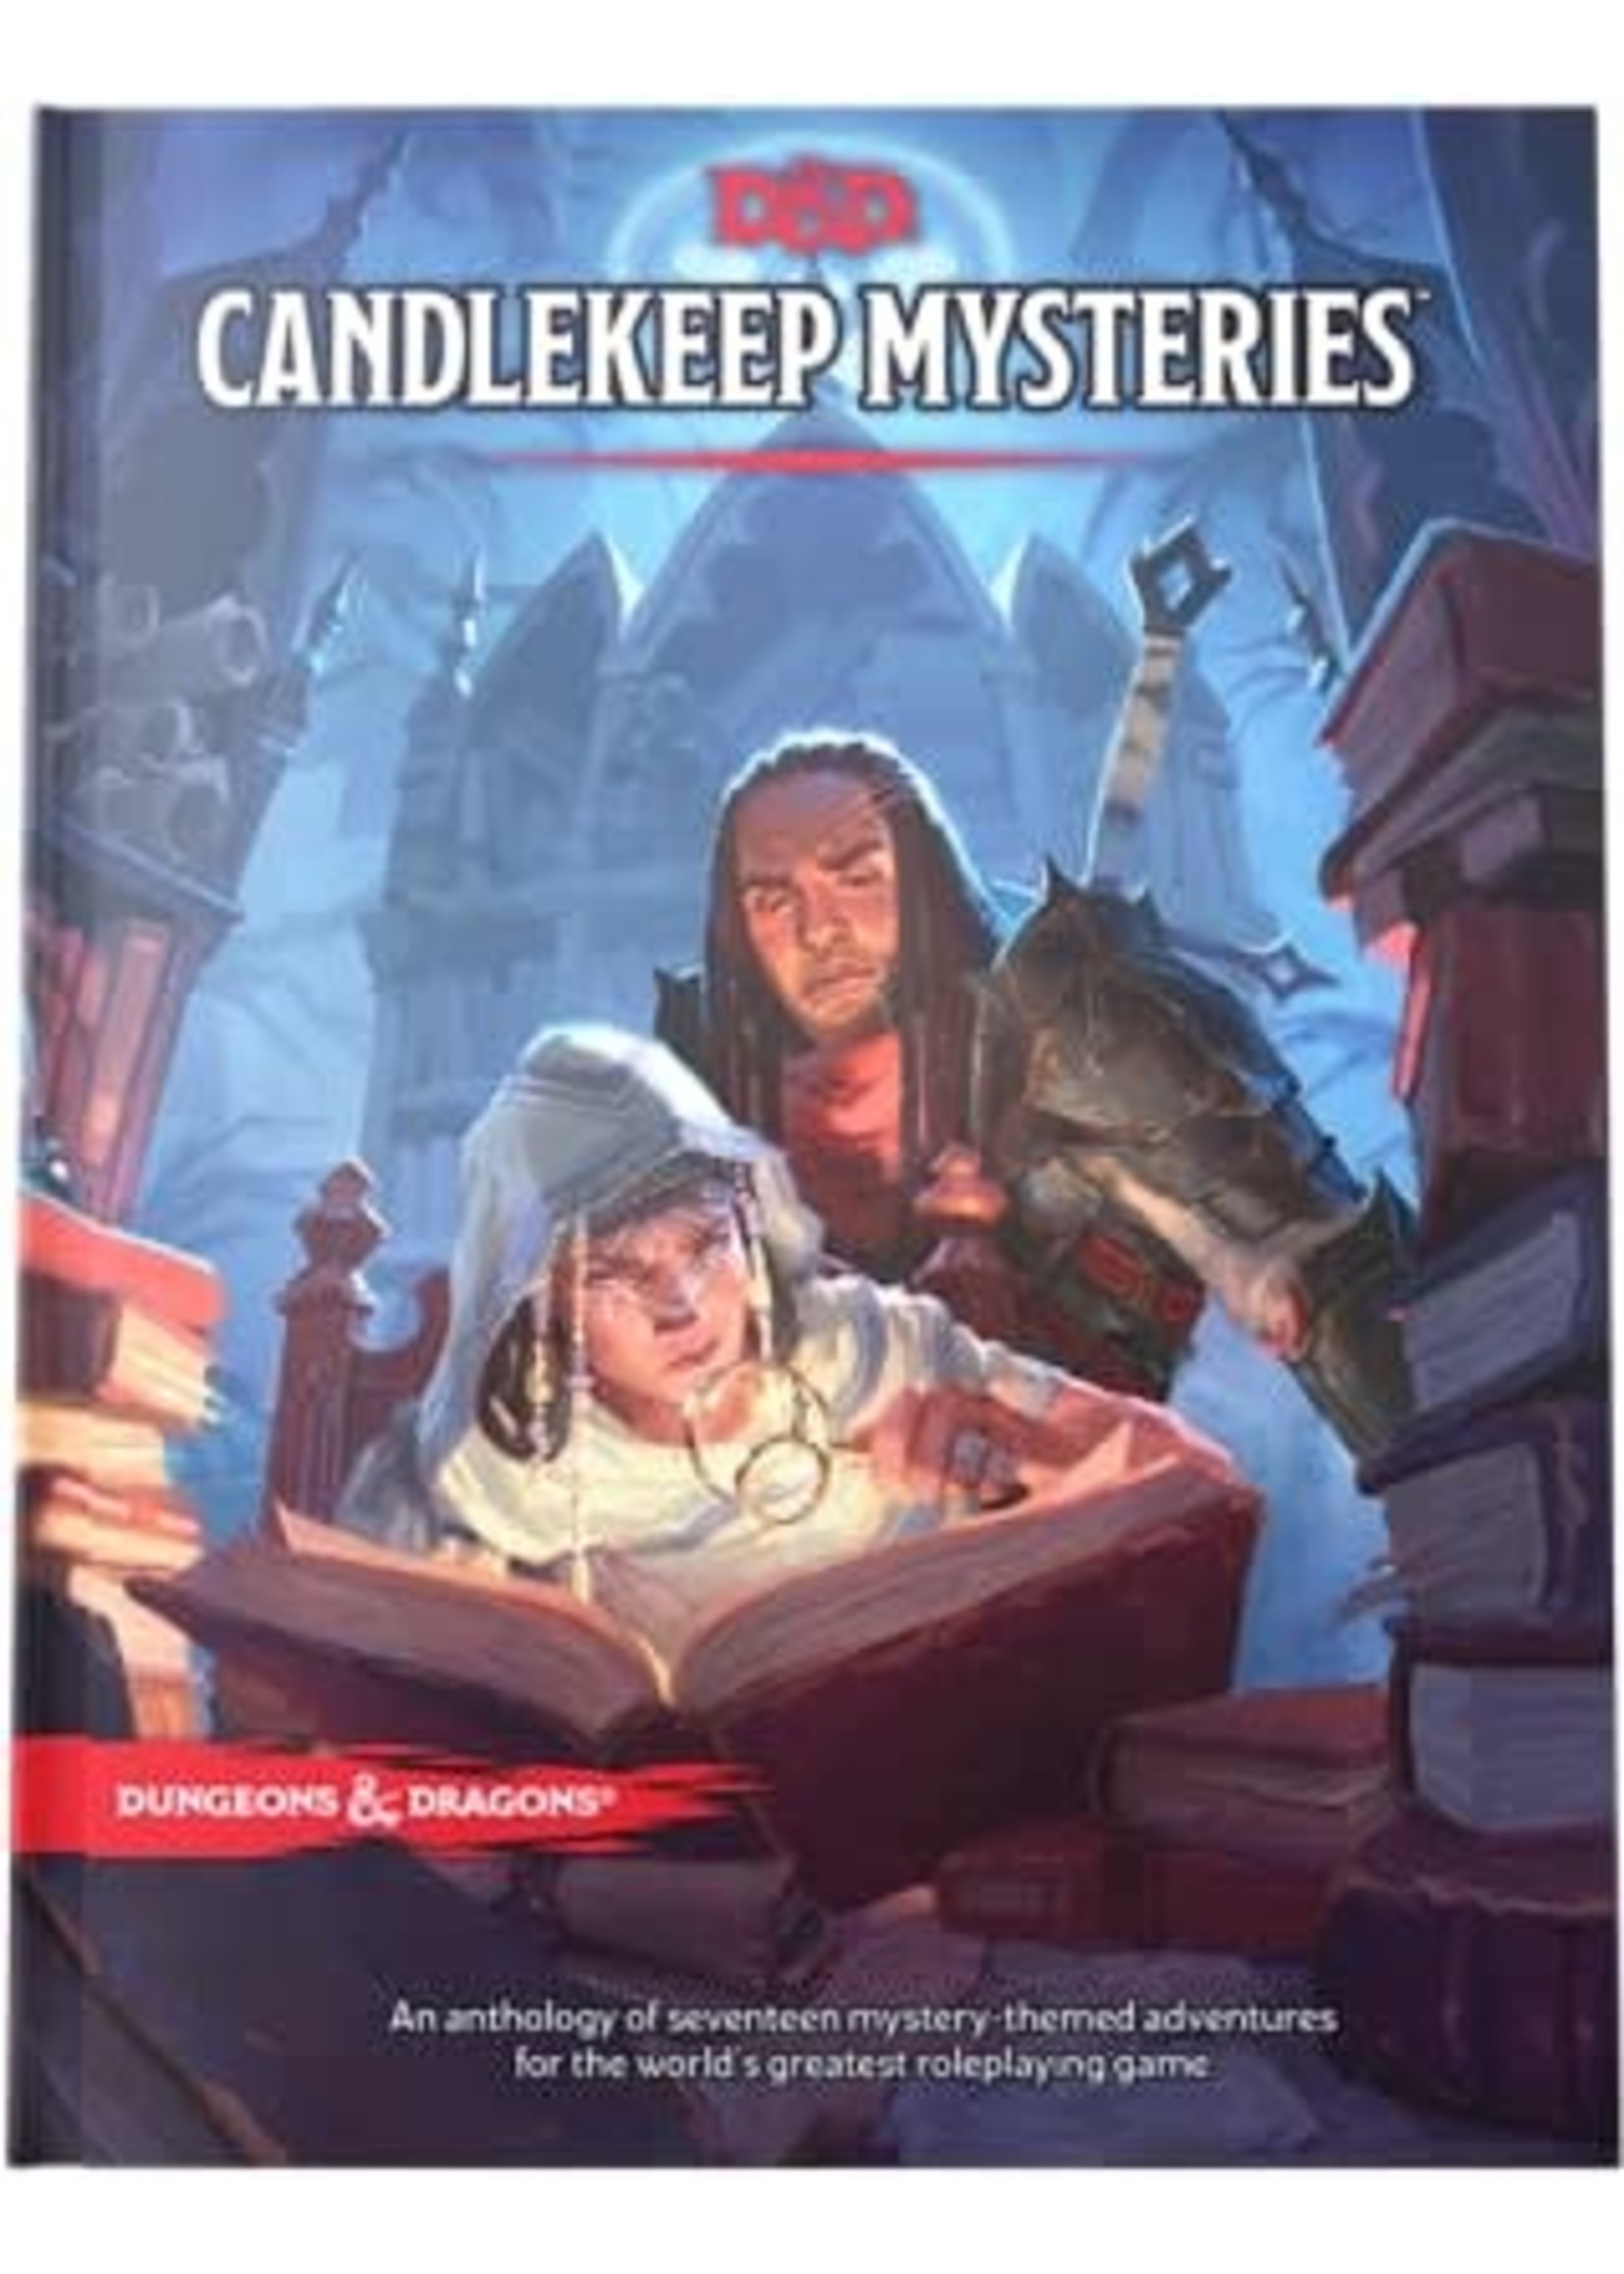 Candlekeep Mysteries (Dungeons & Dragons, 5th Edition) by Wizards of the Coast